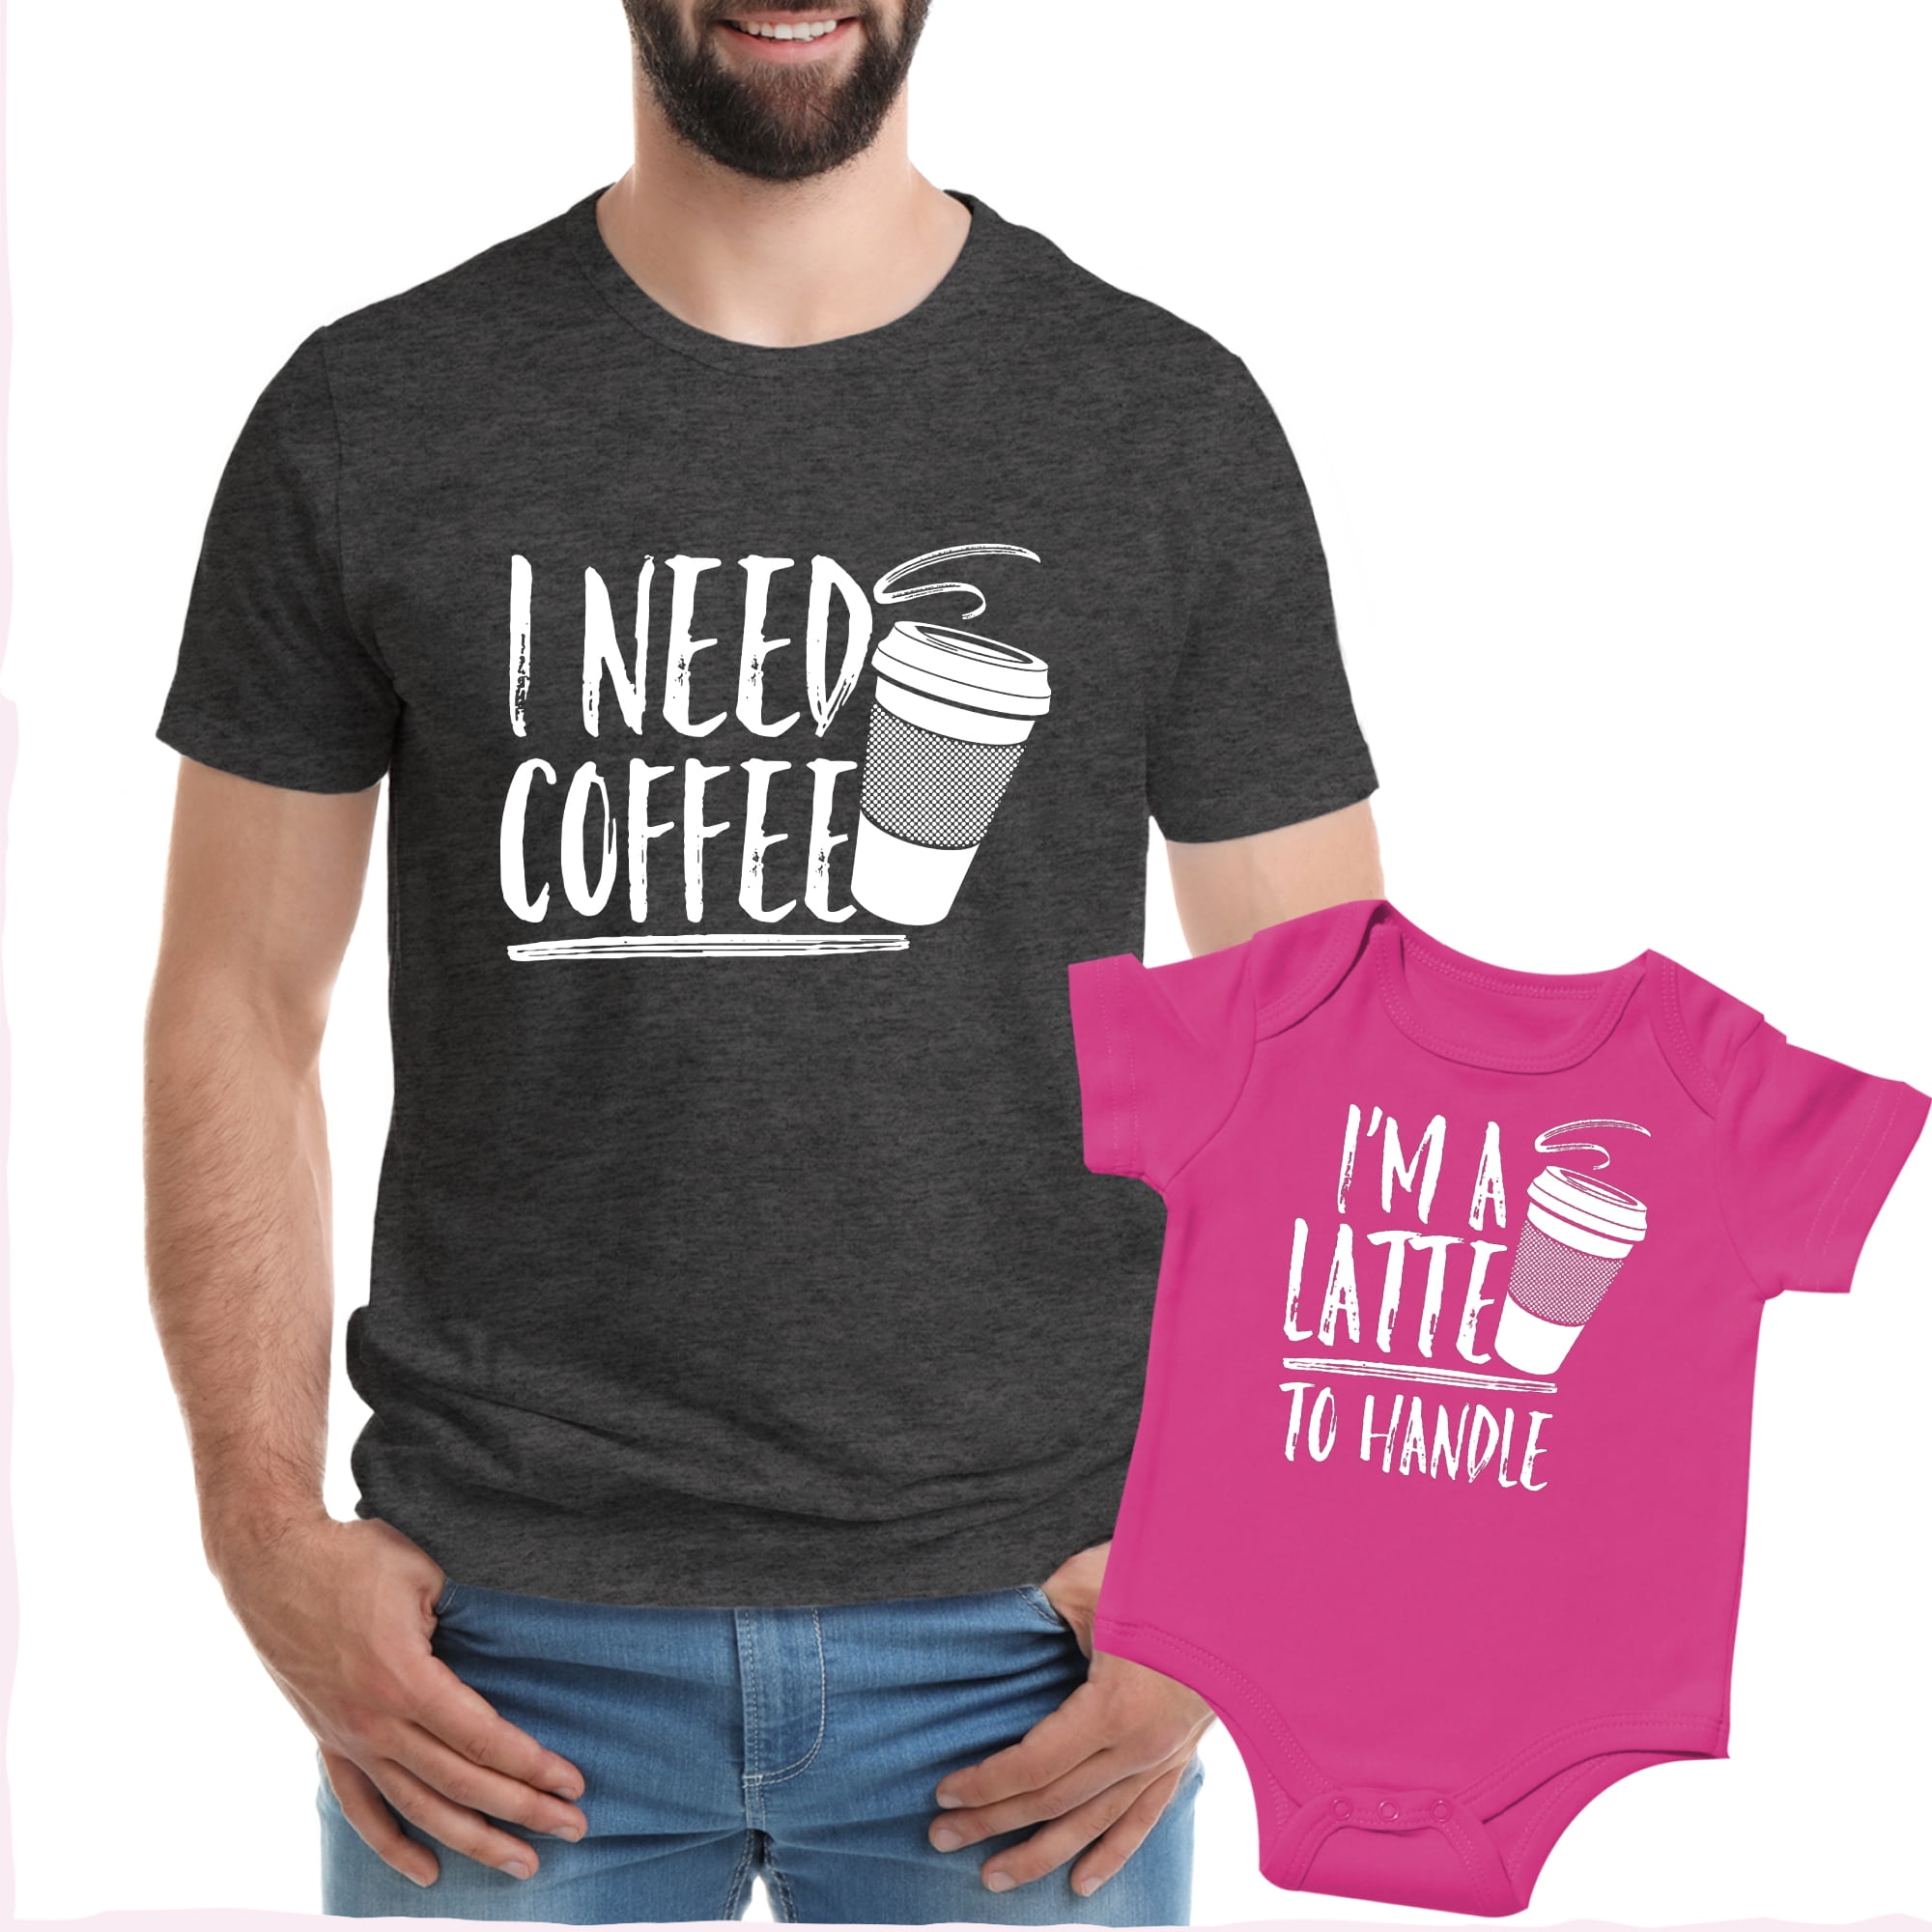 DADDY AND BABY T-SHIRT AND BODYSUIT SET MATCHING TOPS FOR FATHER AN BABY 